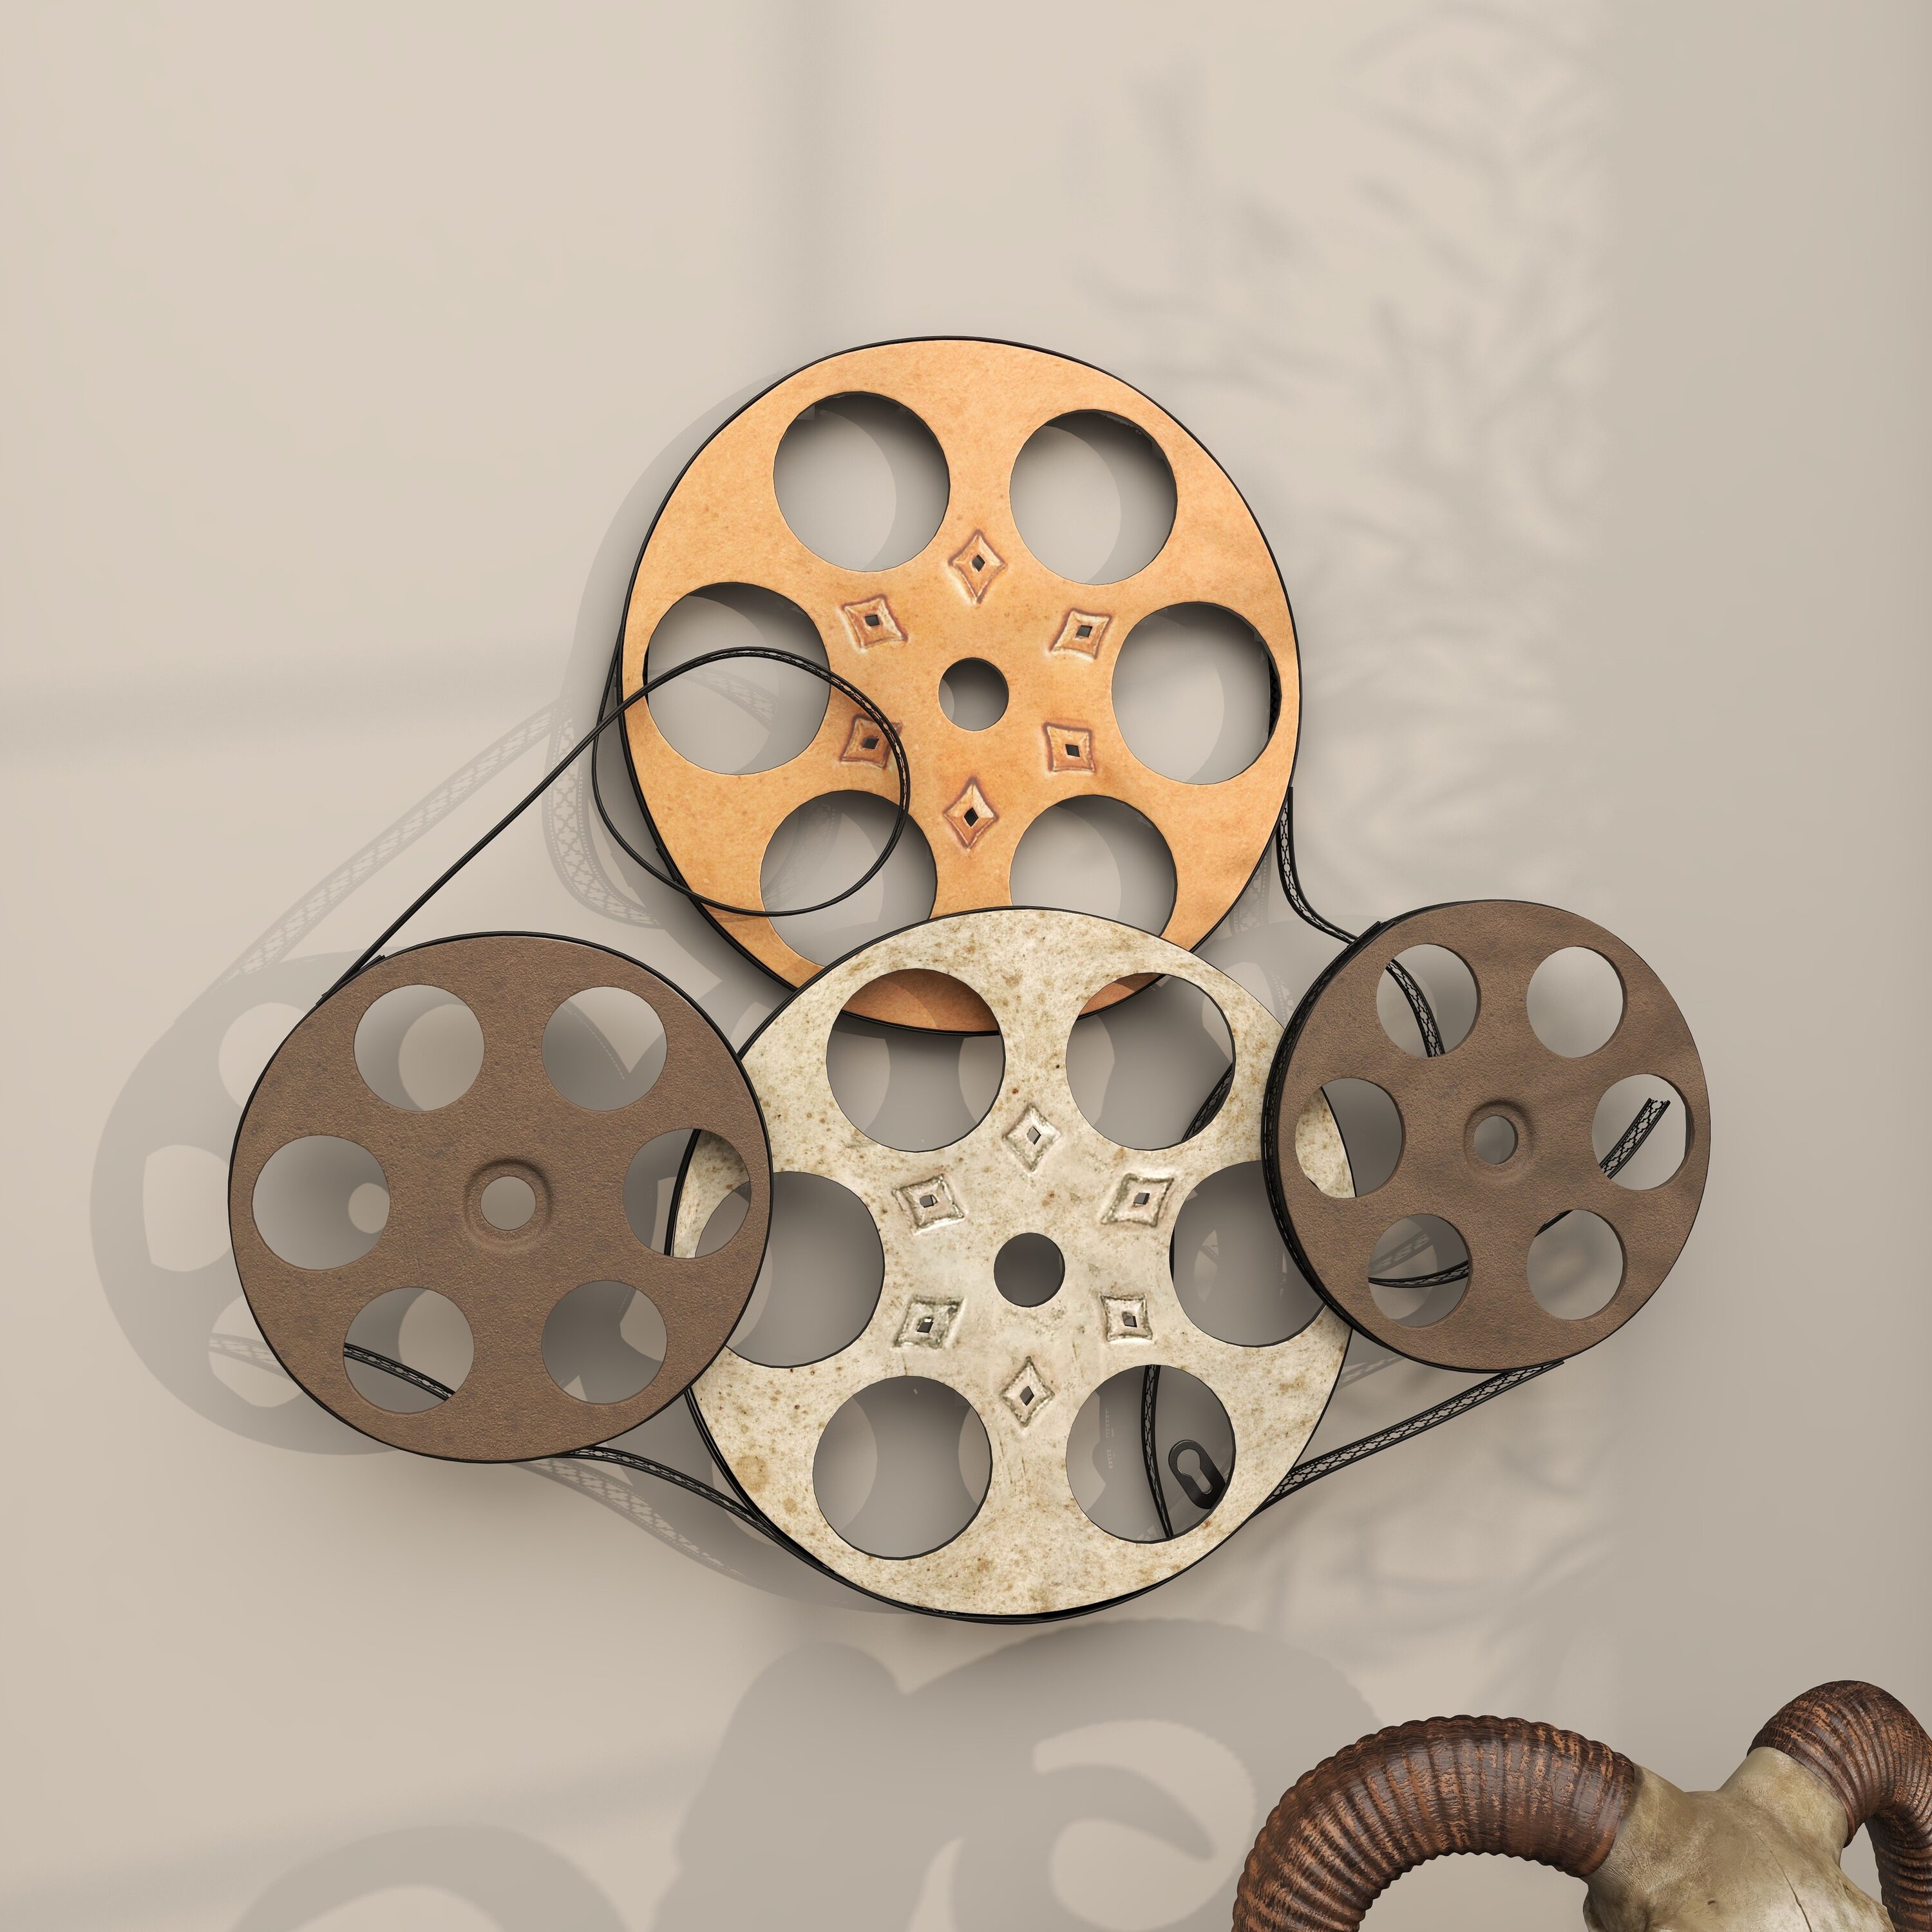 Grayson Lane 25-in W x 22-in H Metal Film Reels Abstract Wall Sculpture at